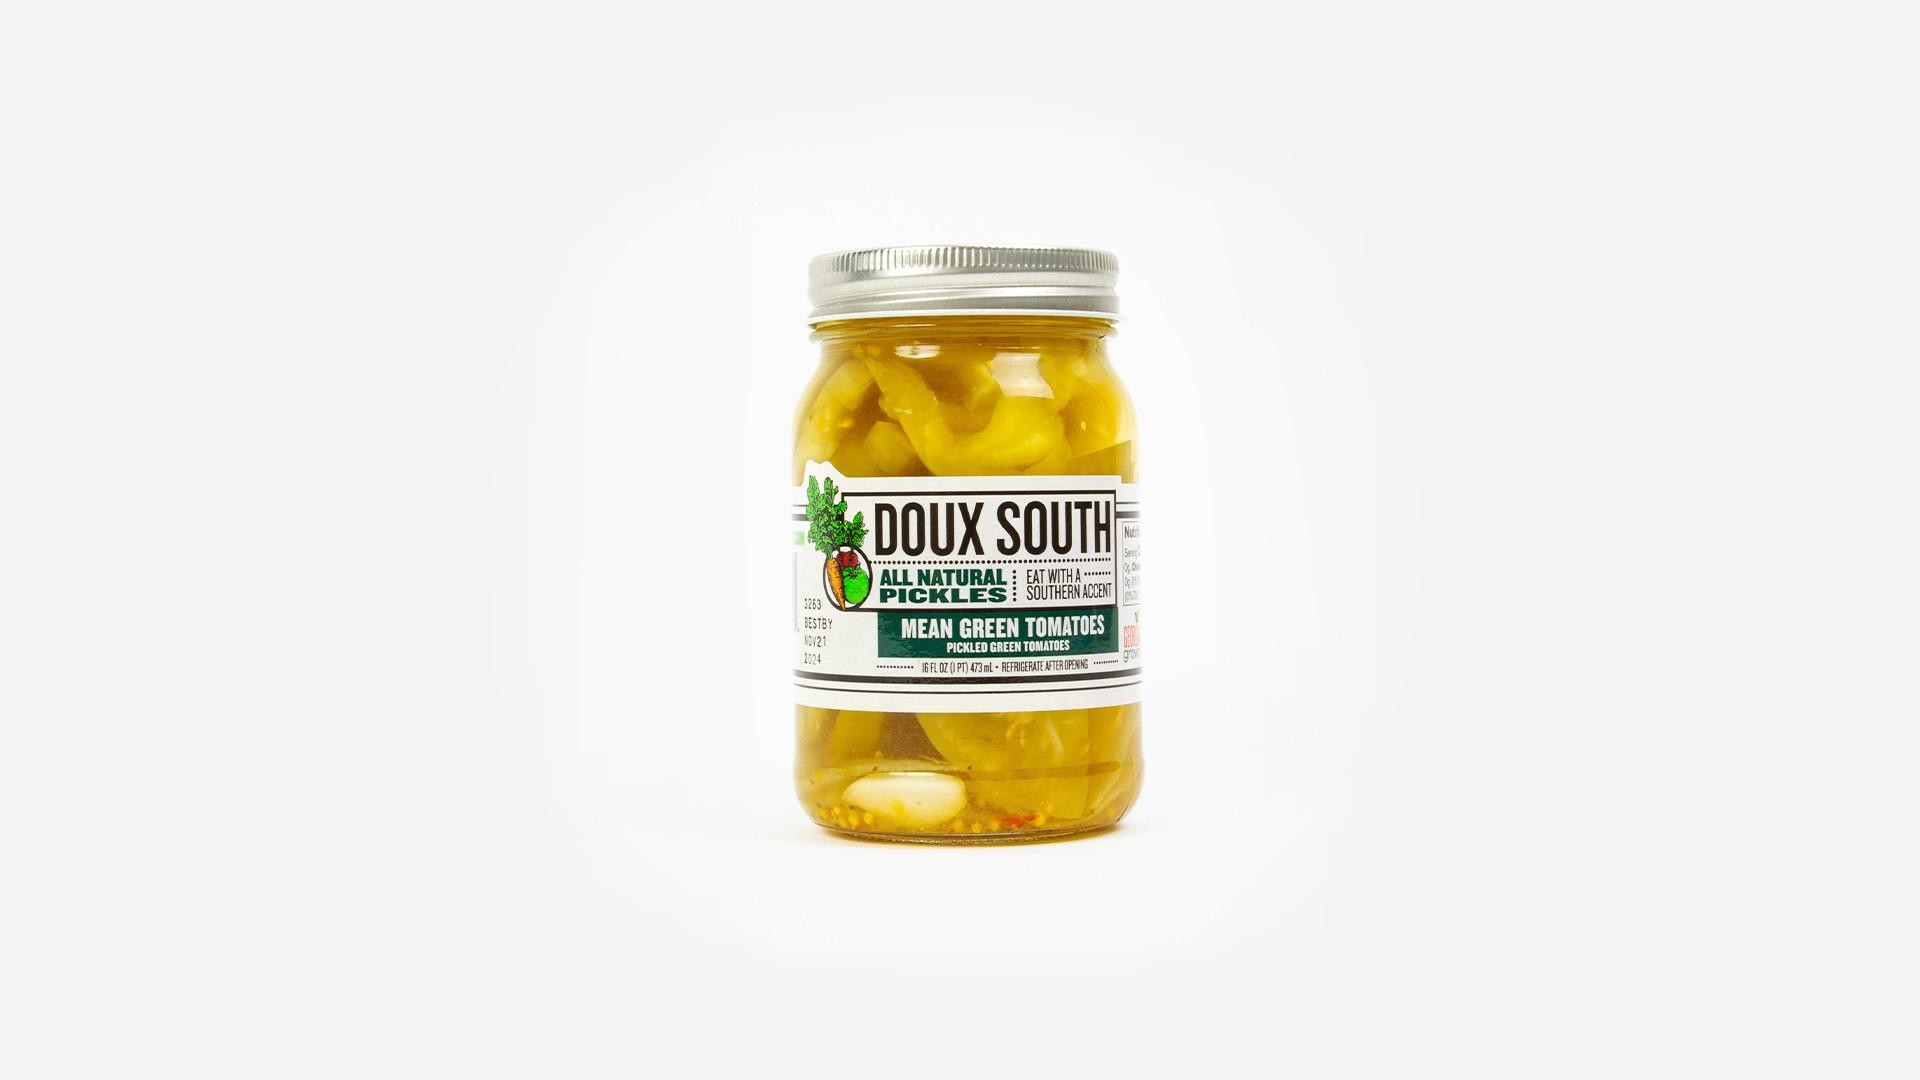 Doux South Mean Green Pickled Tomatoes